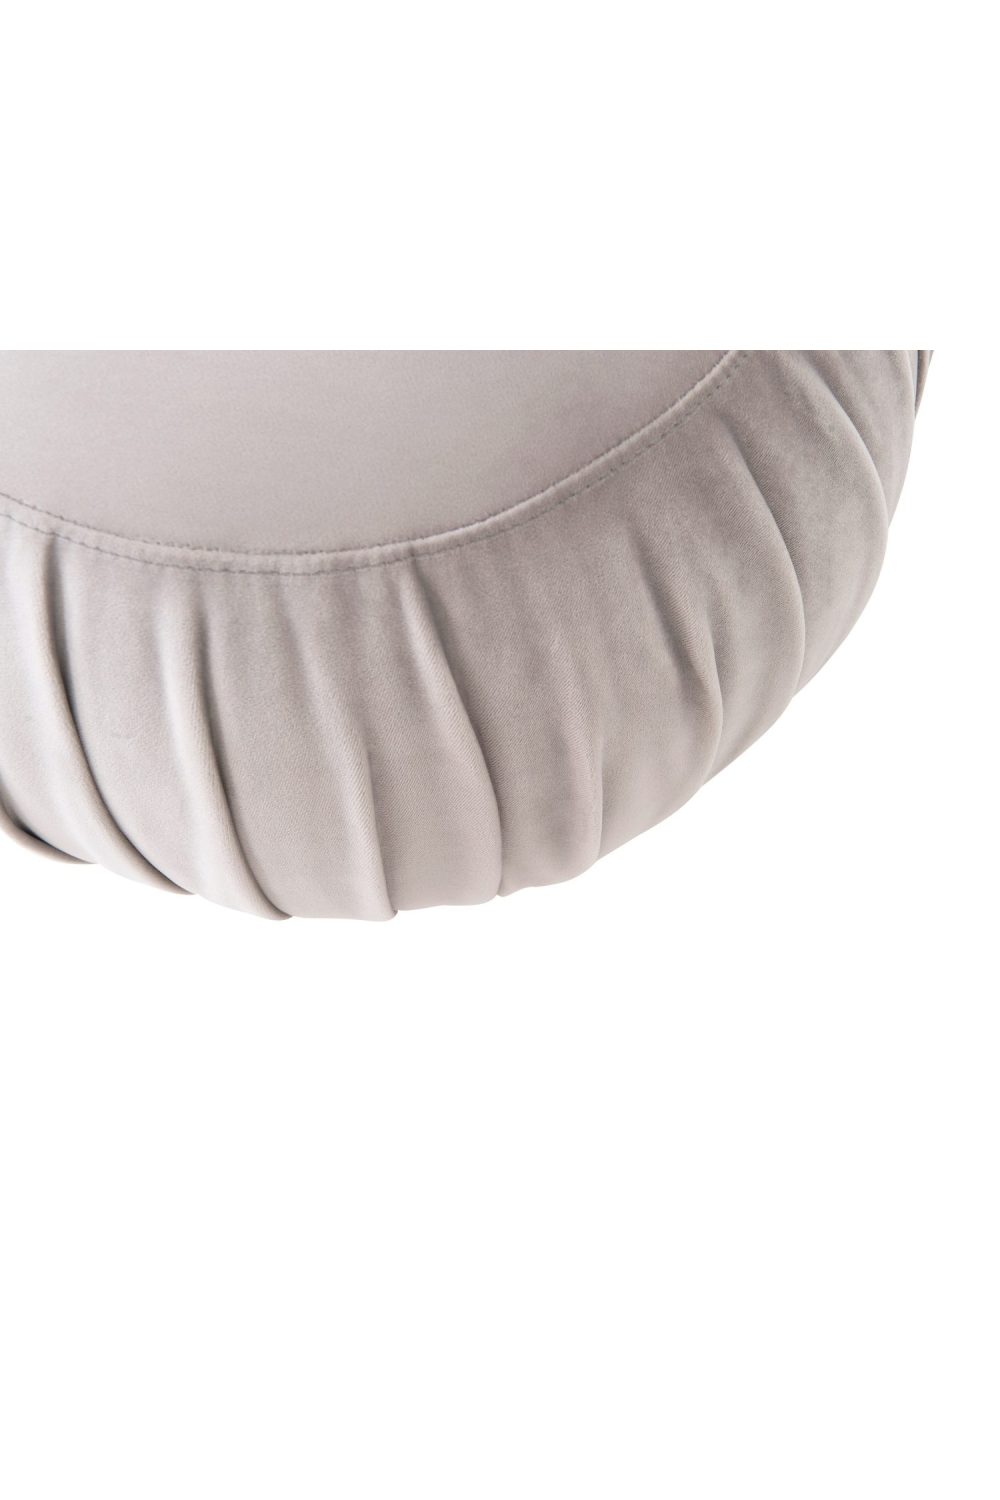 Pleated Round Accent Stool | Liang & Eimil Charlie | OROA.com